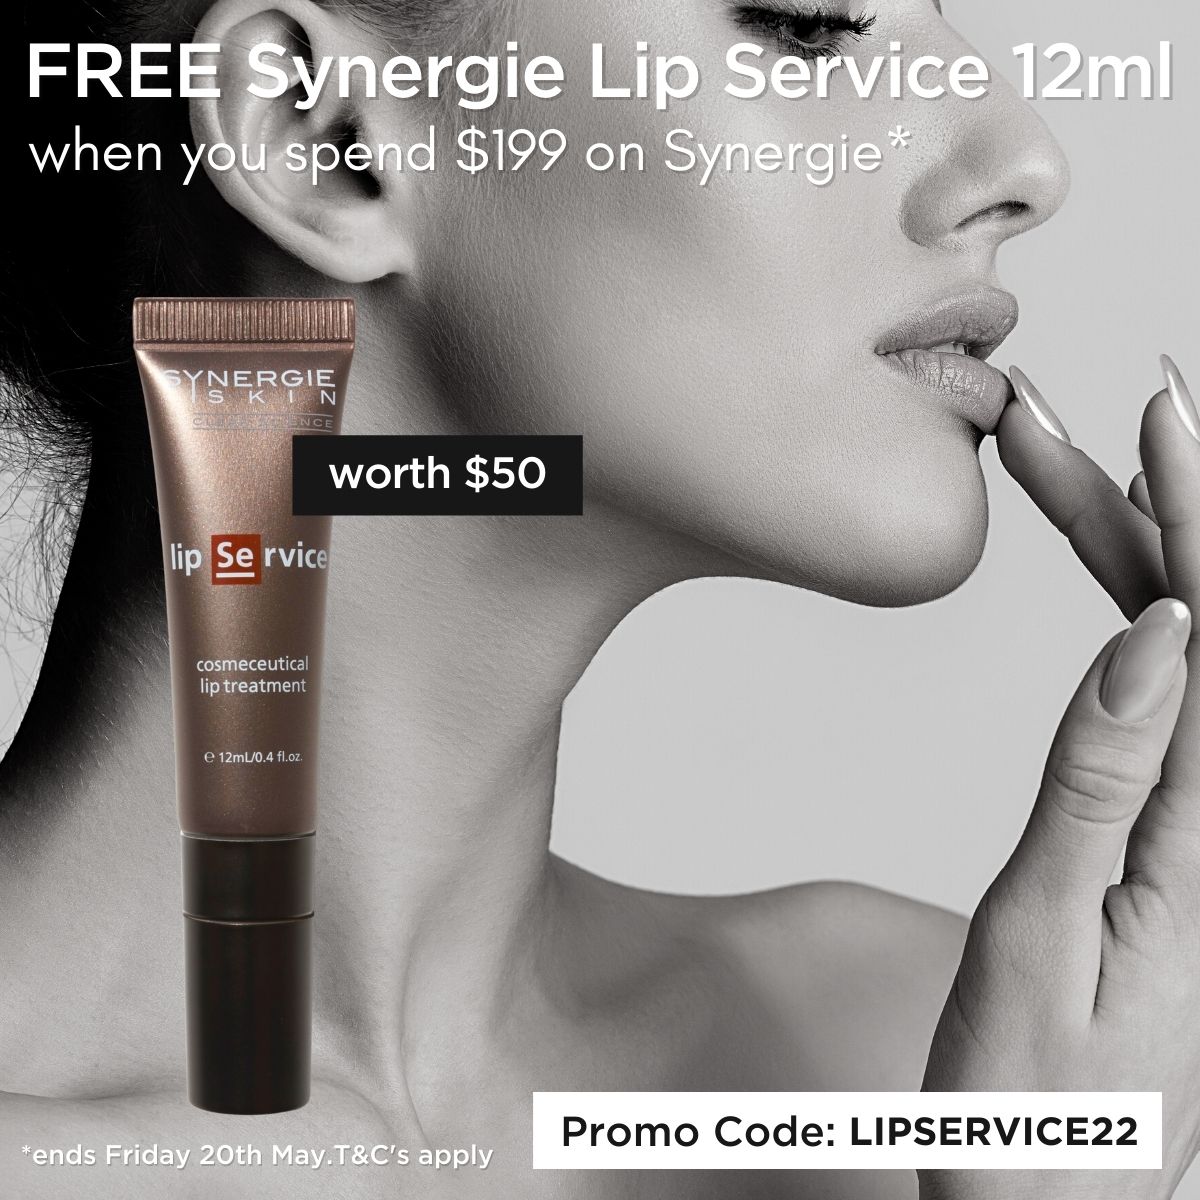 Free Synergie Lip Service 12ml Offer. Login to purchase if enabled for Synergie or Email/Phone to Enquire.